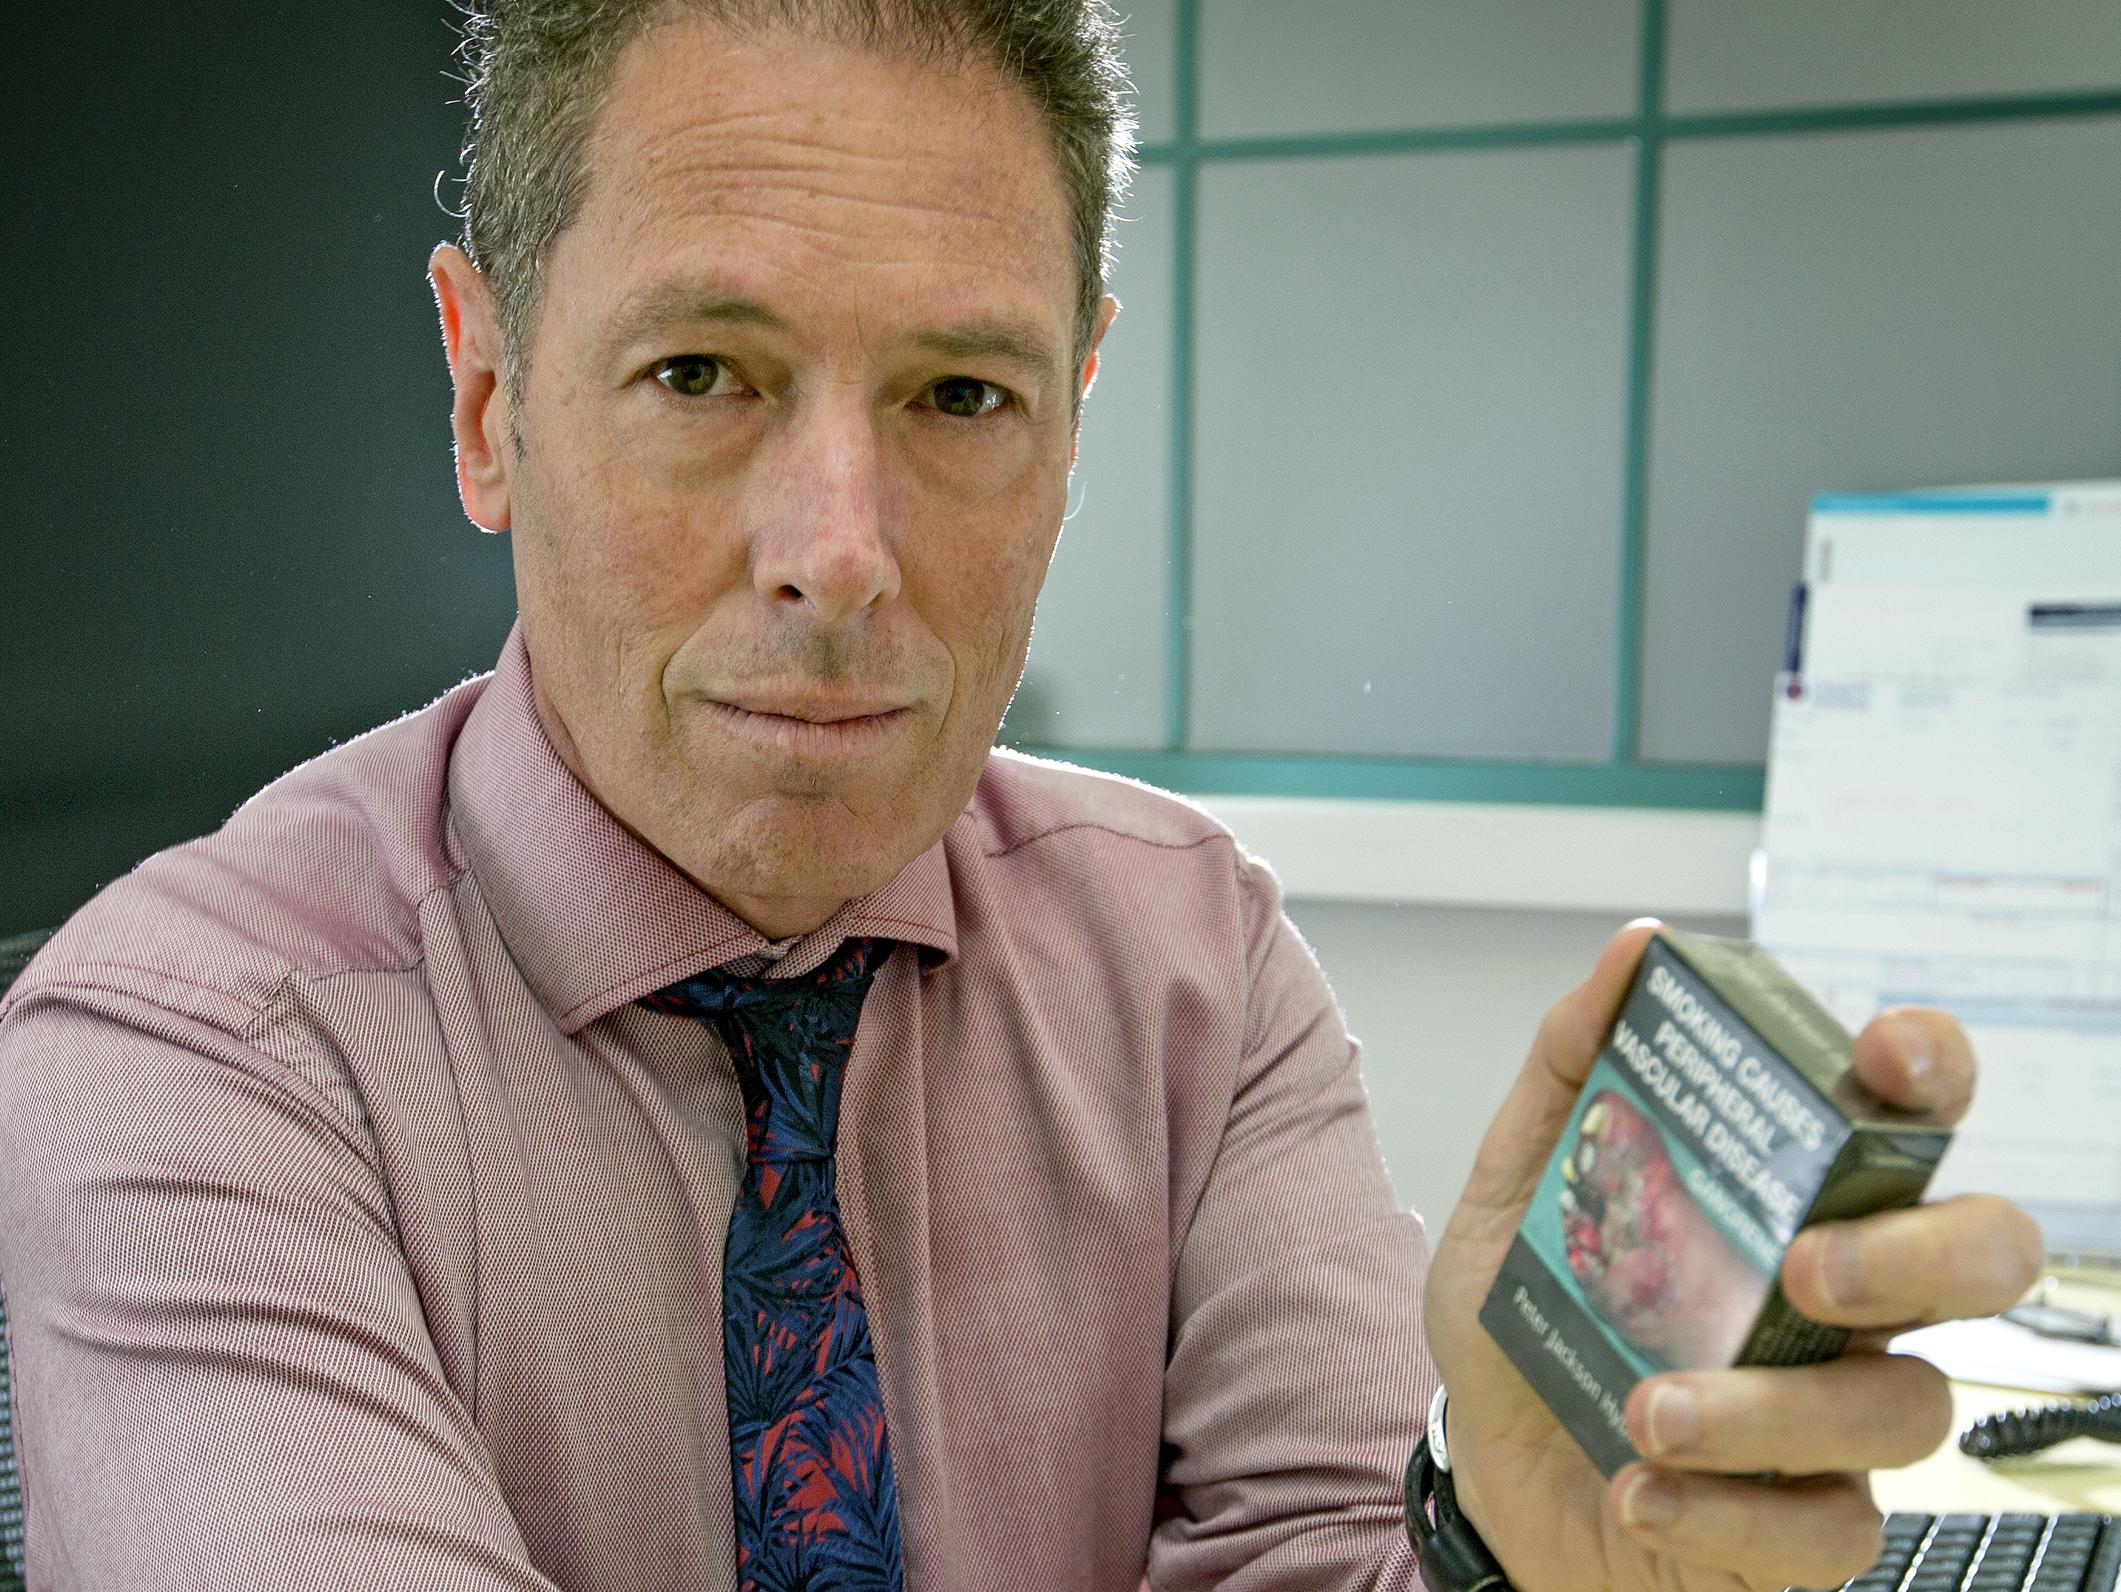 Dr Joe Kosterich believes E -cigarettes are a valid tool to help smokers quit tobacco.